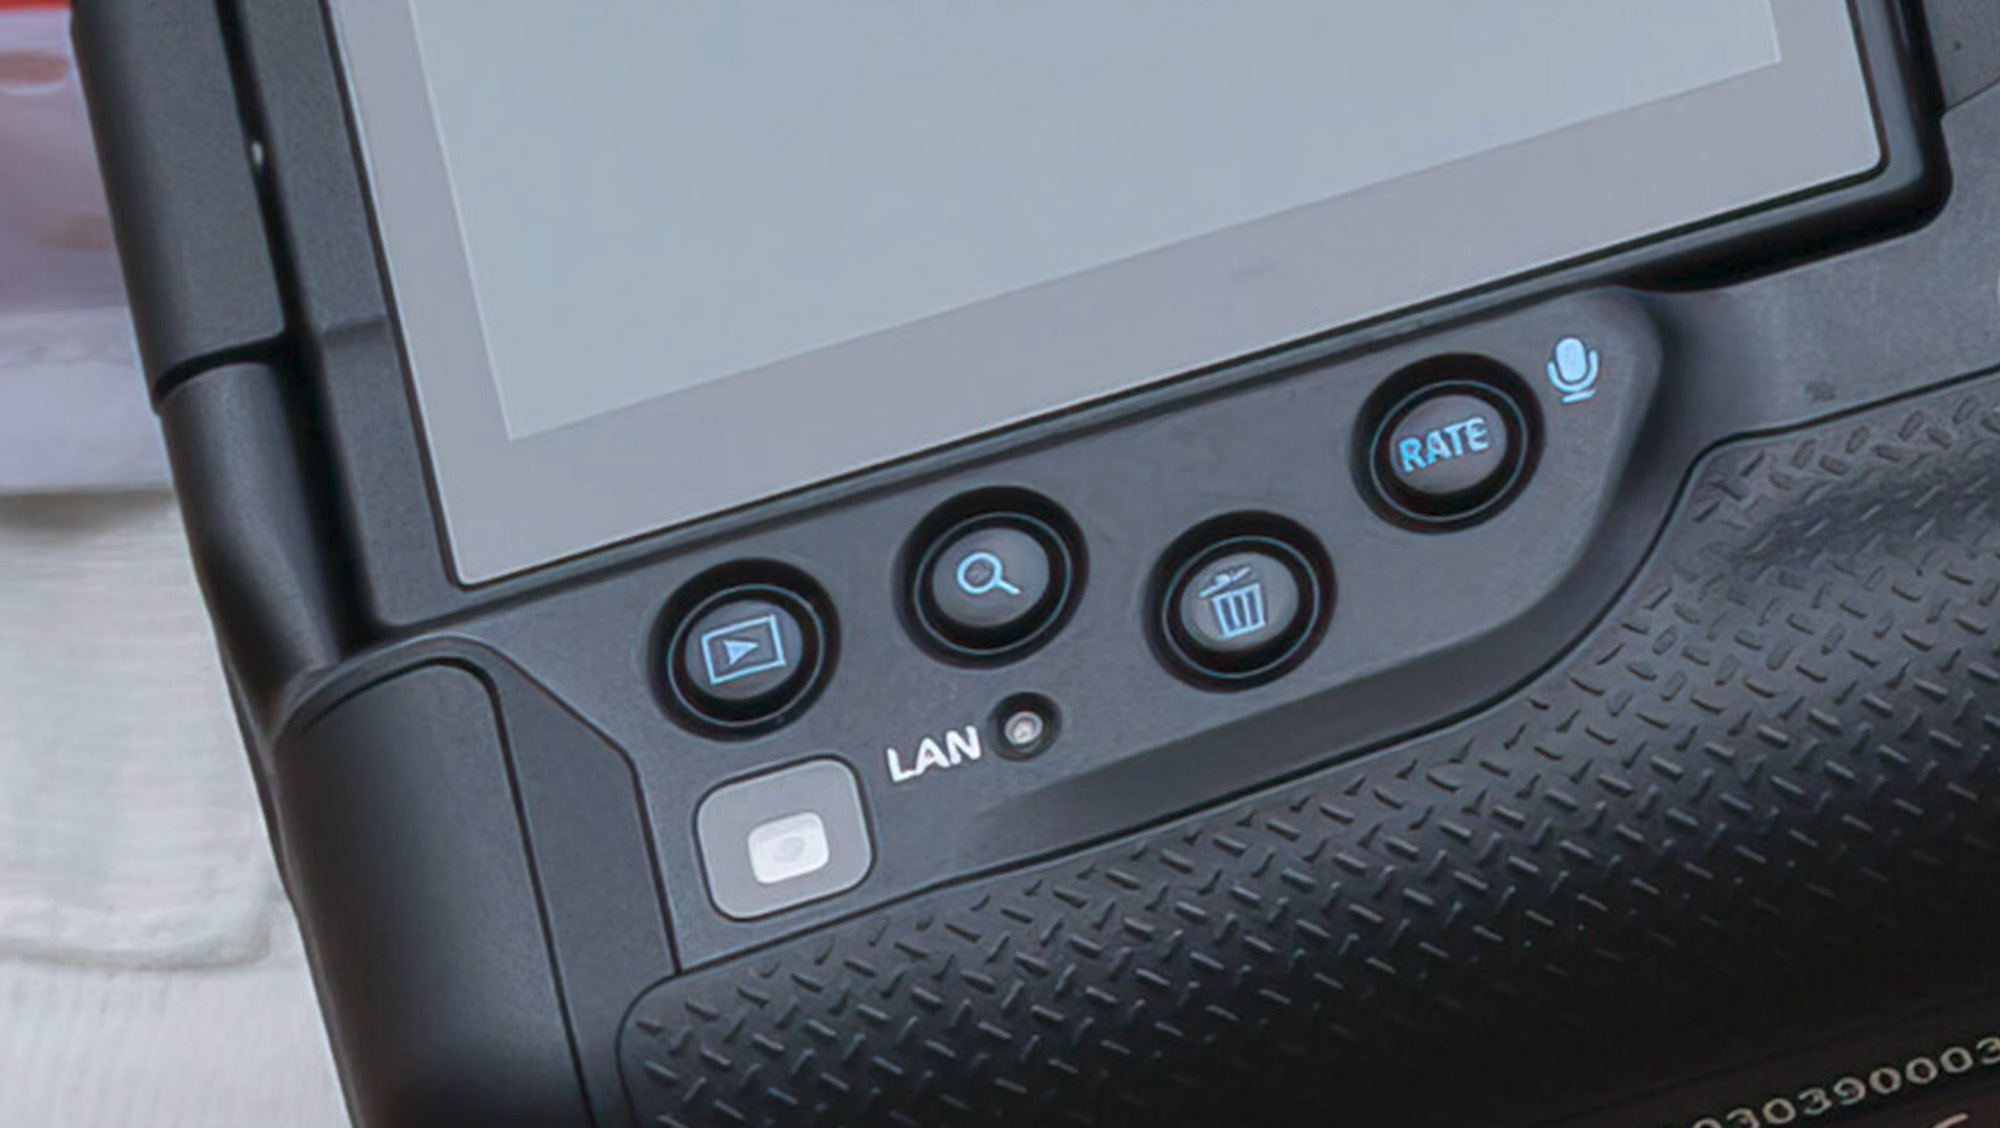 Canon R1 : Rear Buttons and Dials